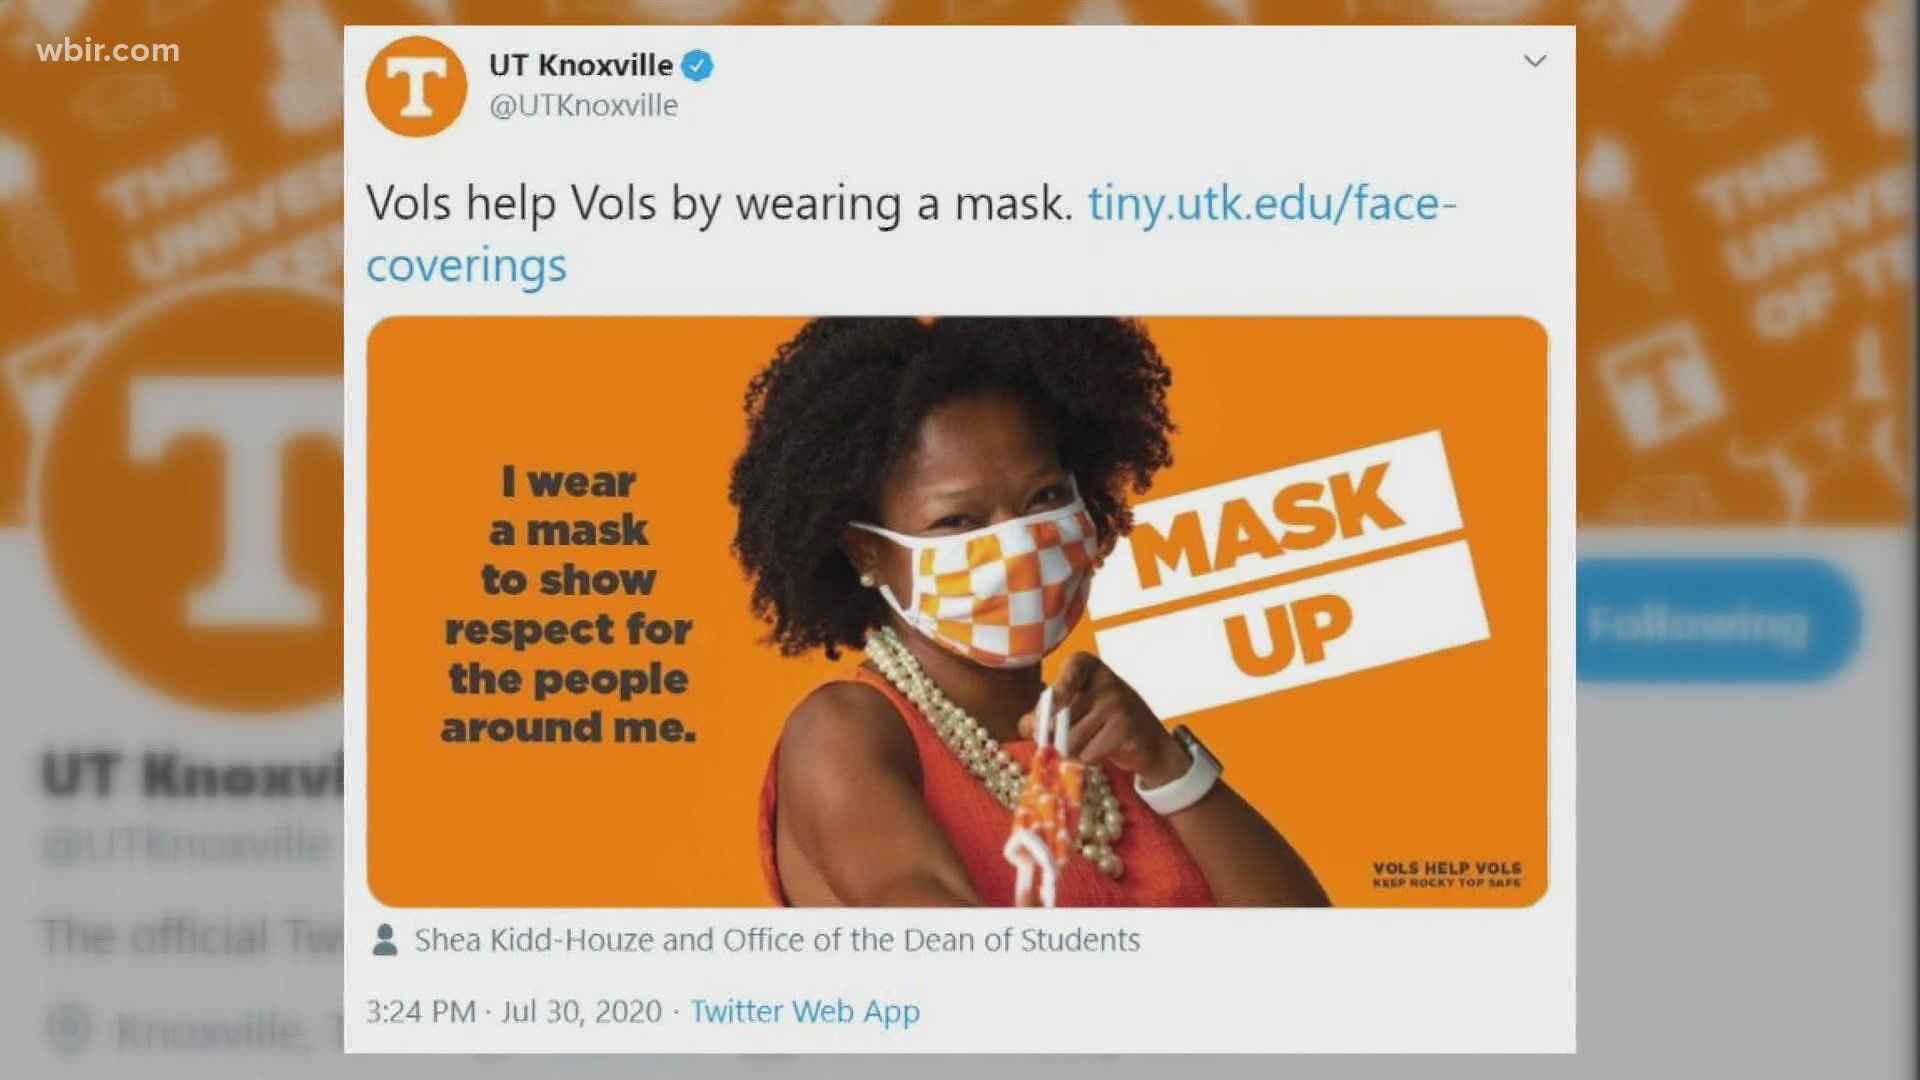 Classes will resume at UT in just three weeks, and administrators say they are planning for every scenario.